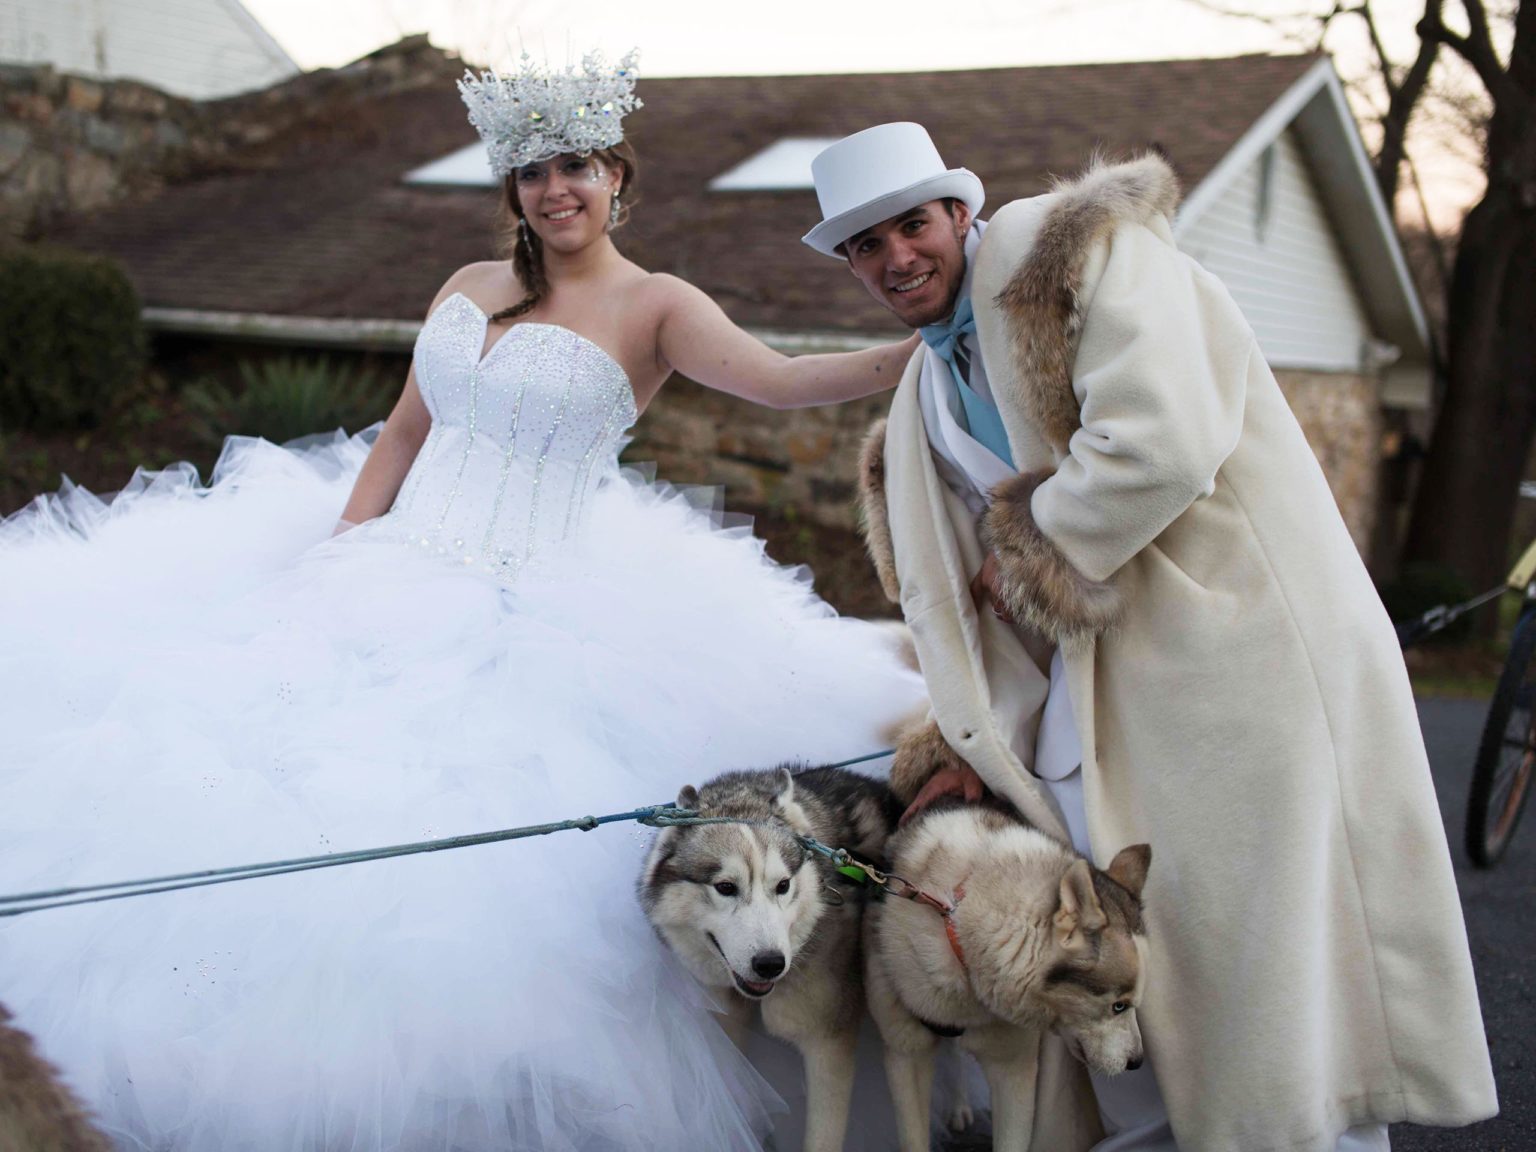 Top 20 Most Outrageous Celebrity Weddings